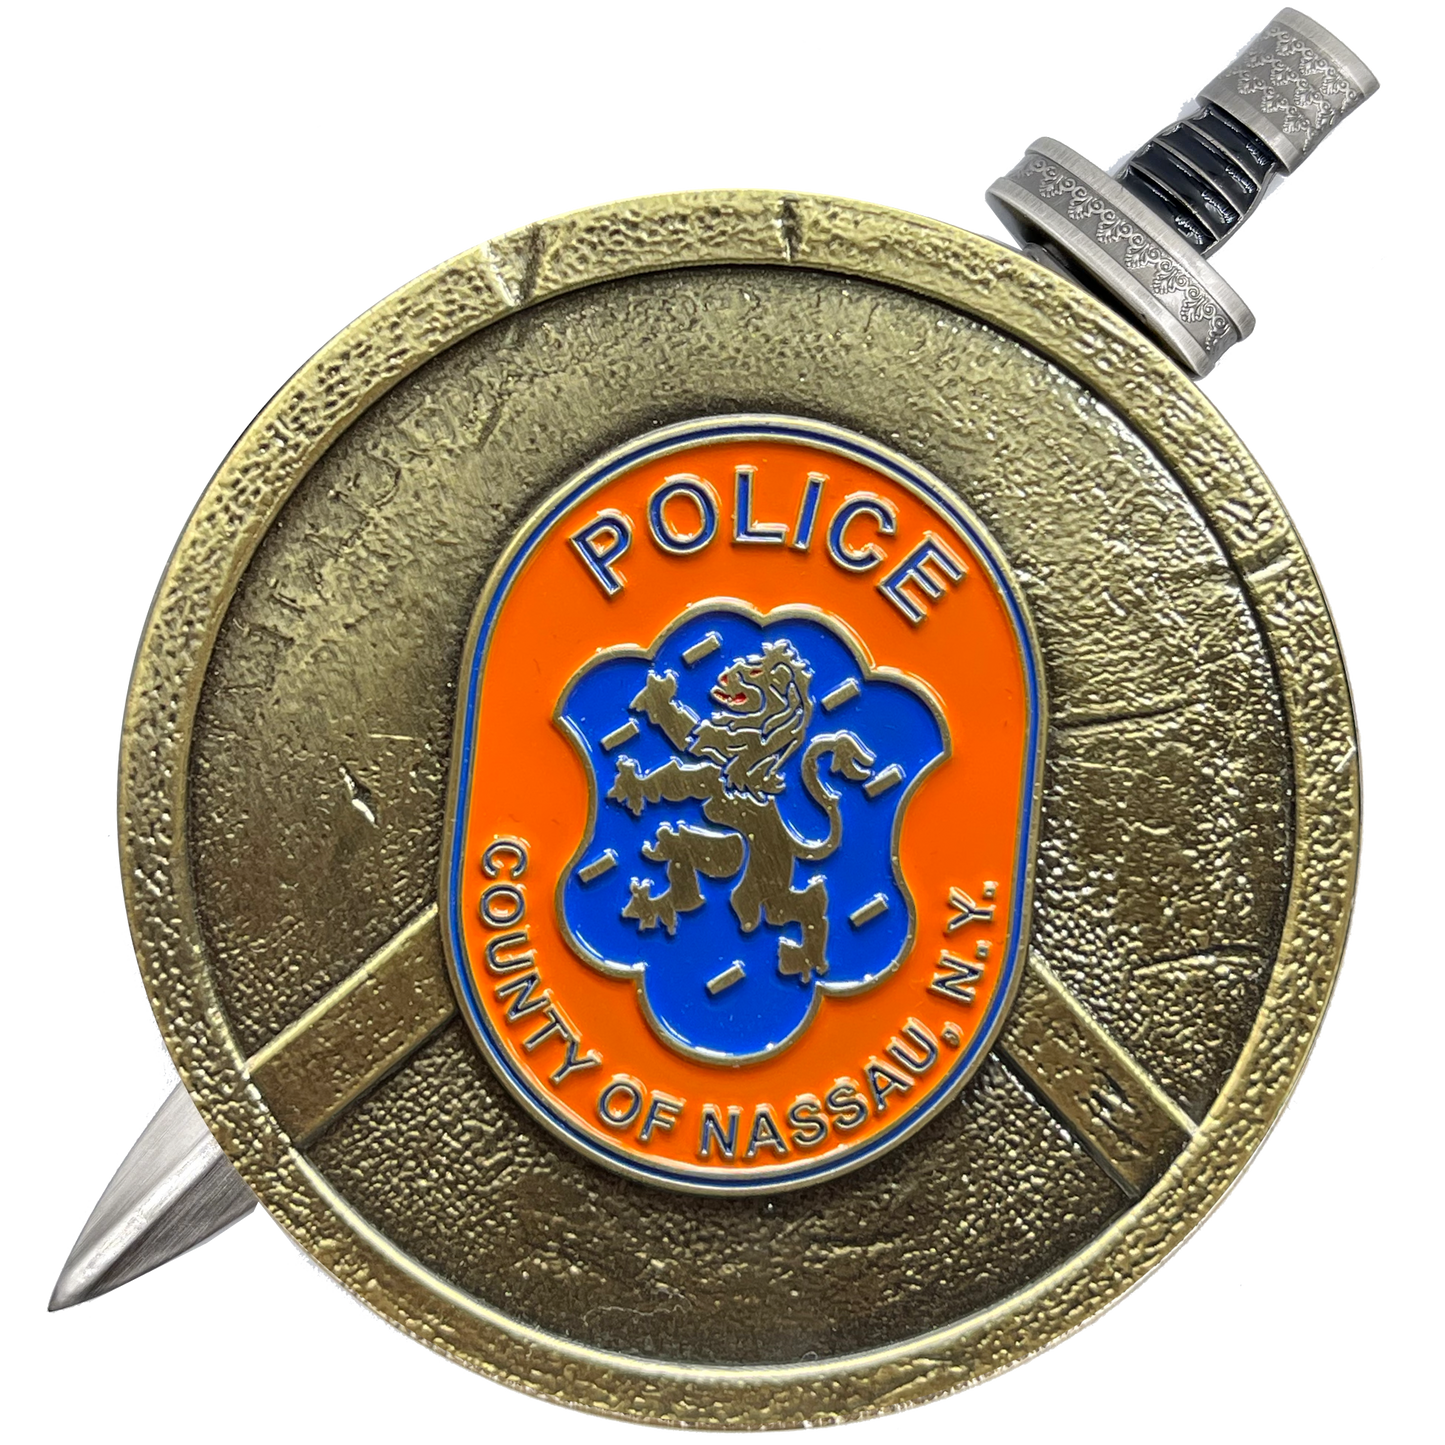 BL8-002 Nassau County Police Department Shield with removable Sword Challenge Coin Set Long Island NCPD